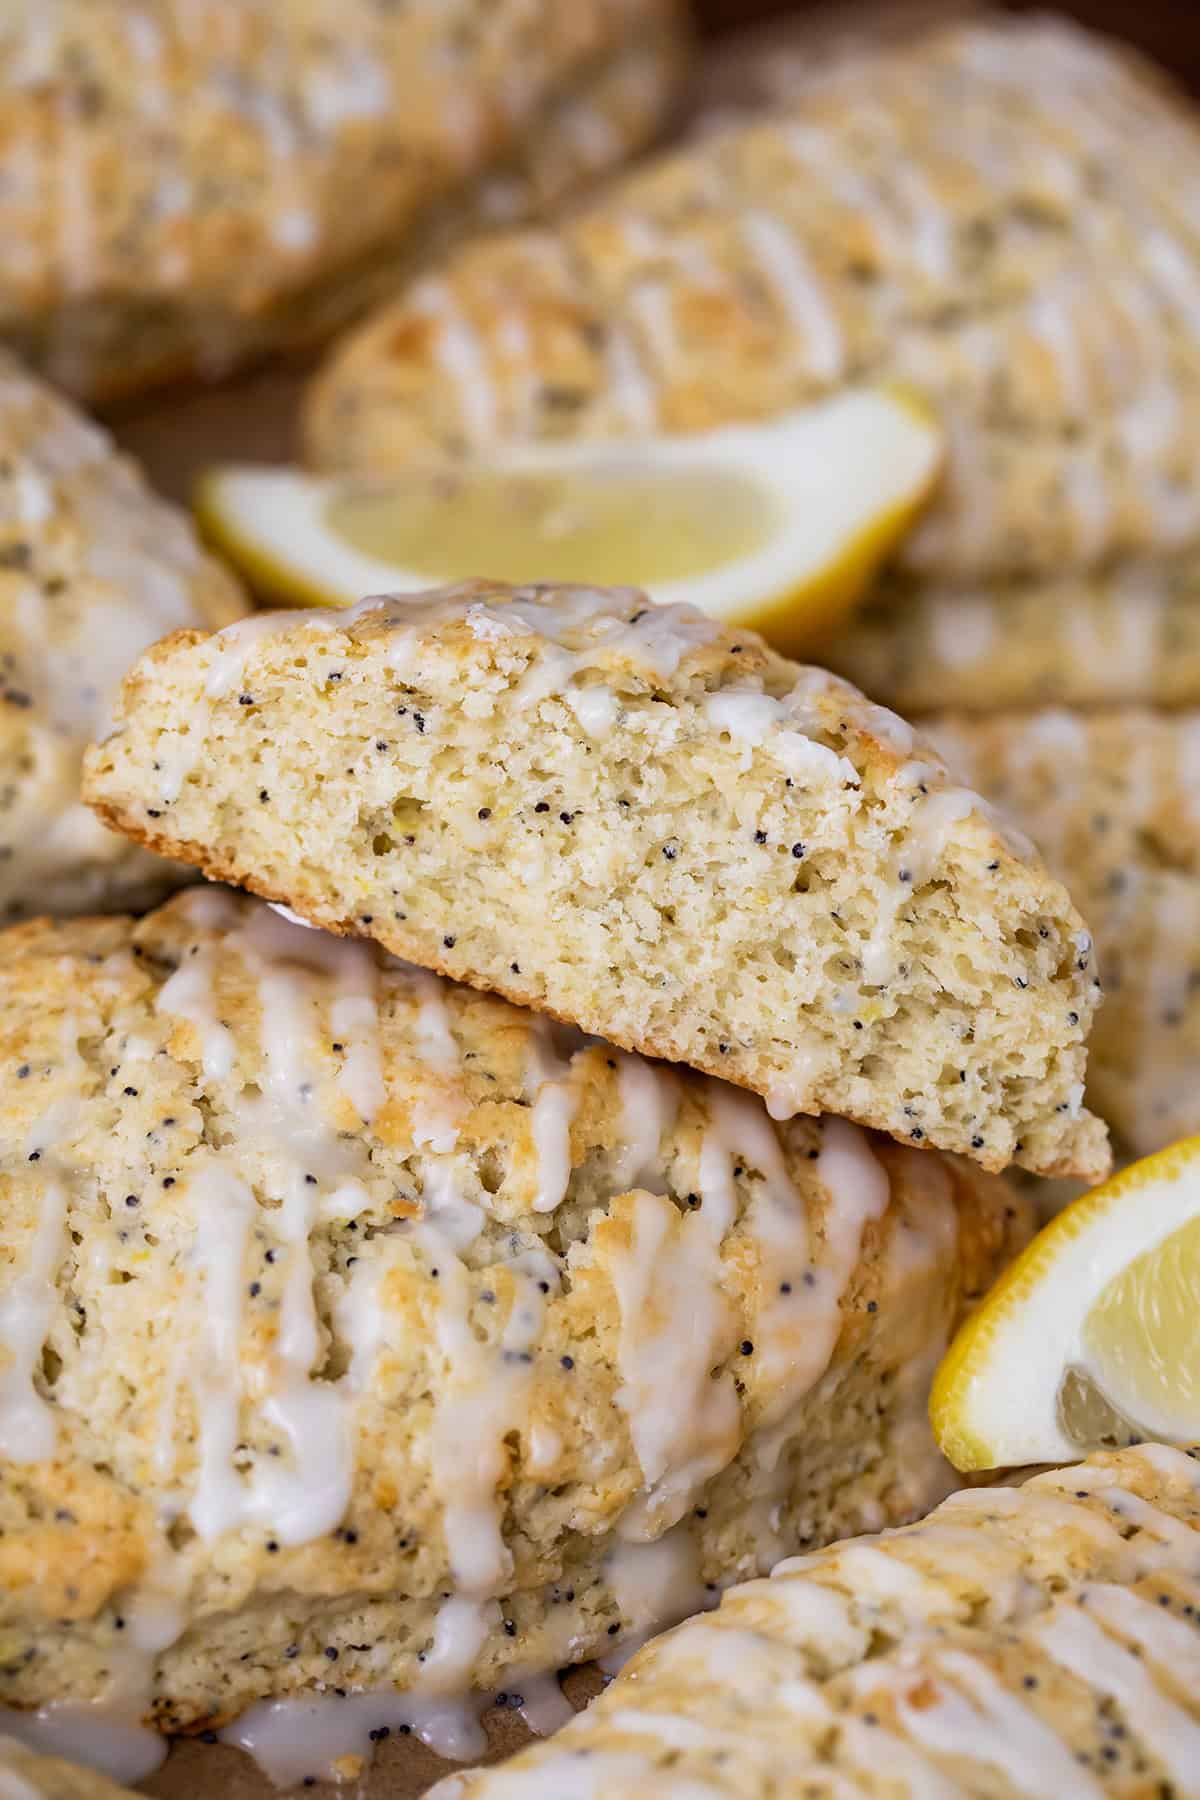 Lemon Poppy Seed Scones stacked closely together with one on its side showing inside texture of scone.